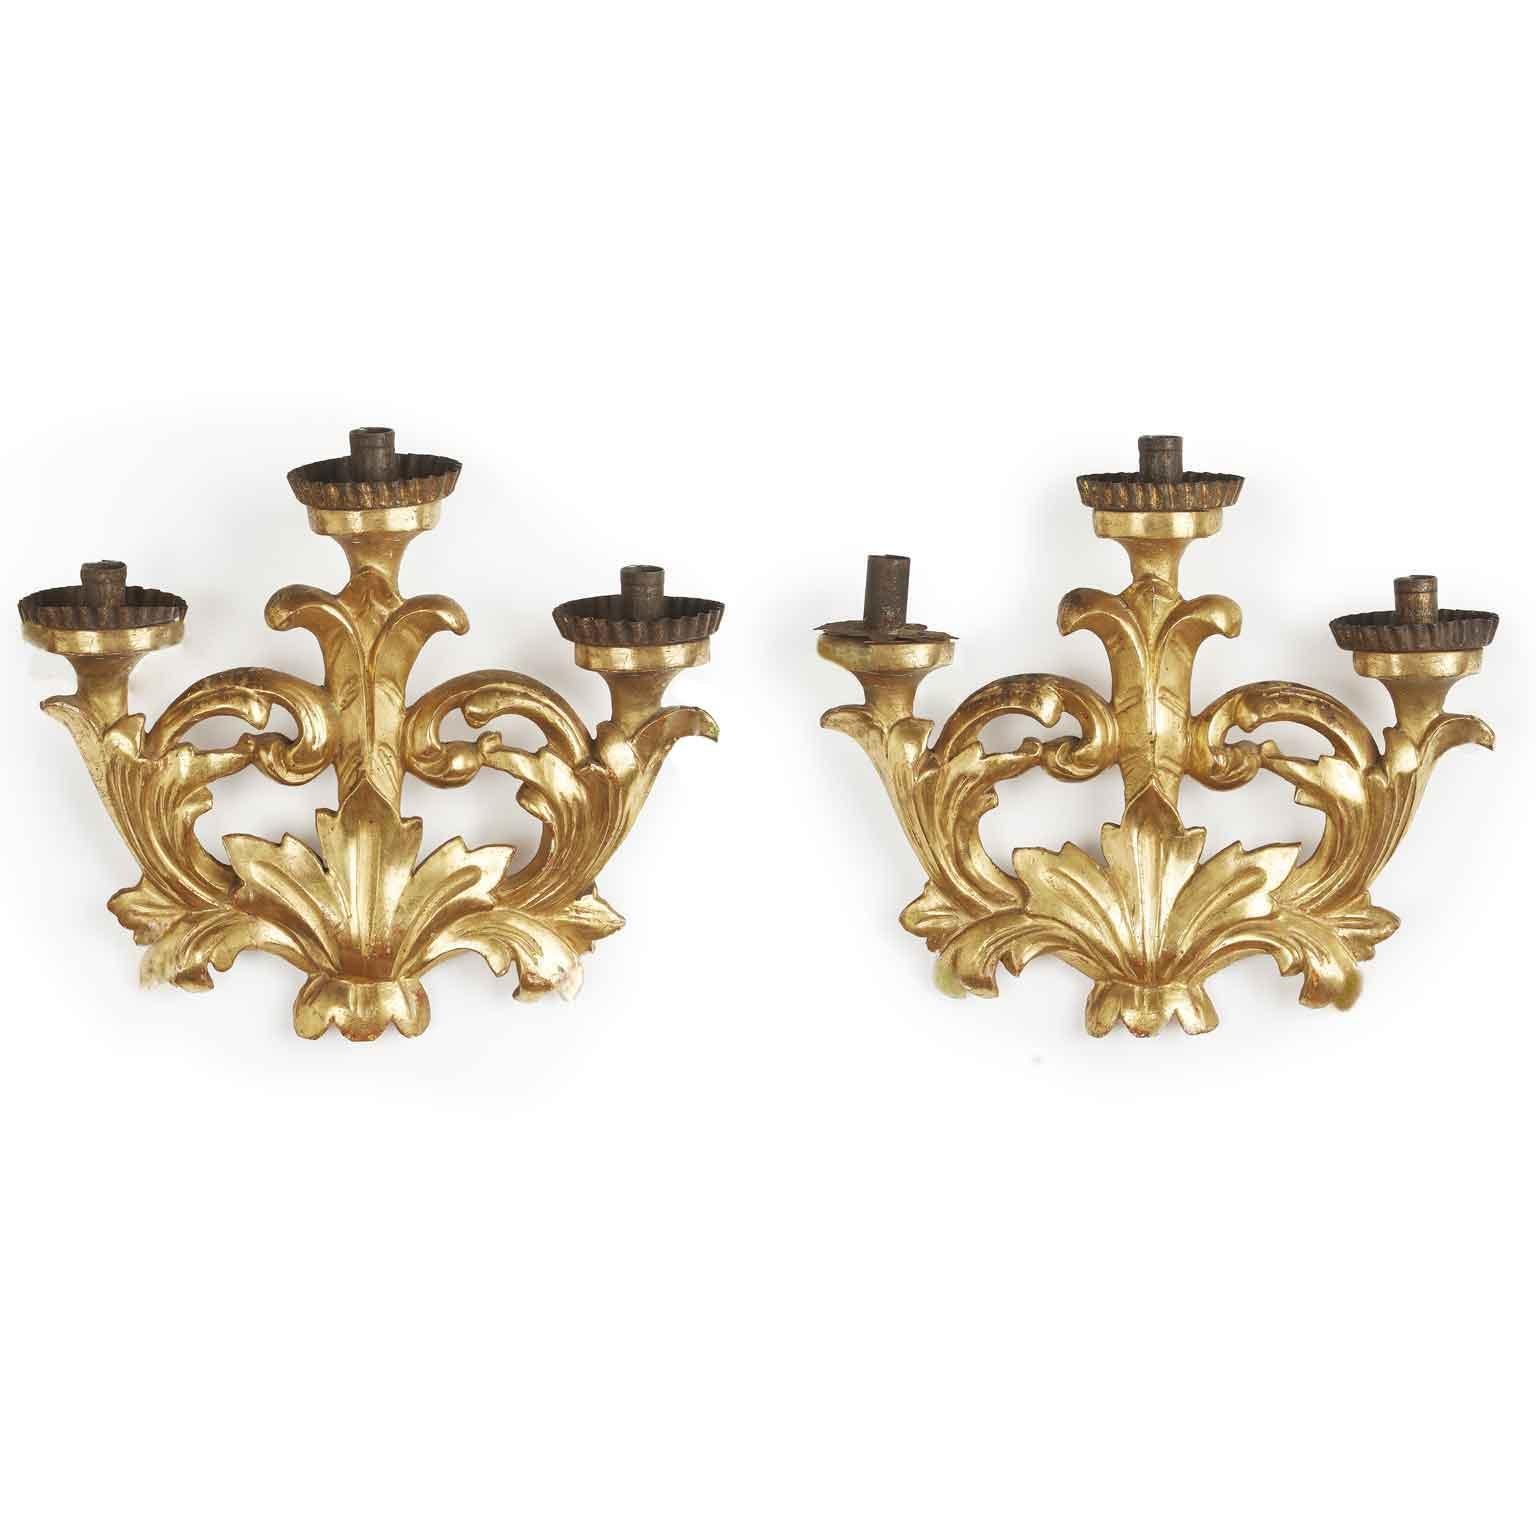 Pair of gold-leaf gilded friezes suitable for three-light sconces, of Italian origin dating back to mid 19th century.They are elements of a pyramid the socalled liturgical altar candelabra featuring several lights, usually seven, arranged in a